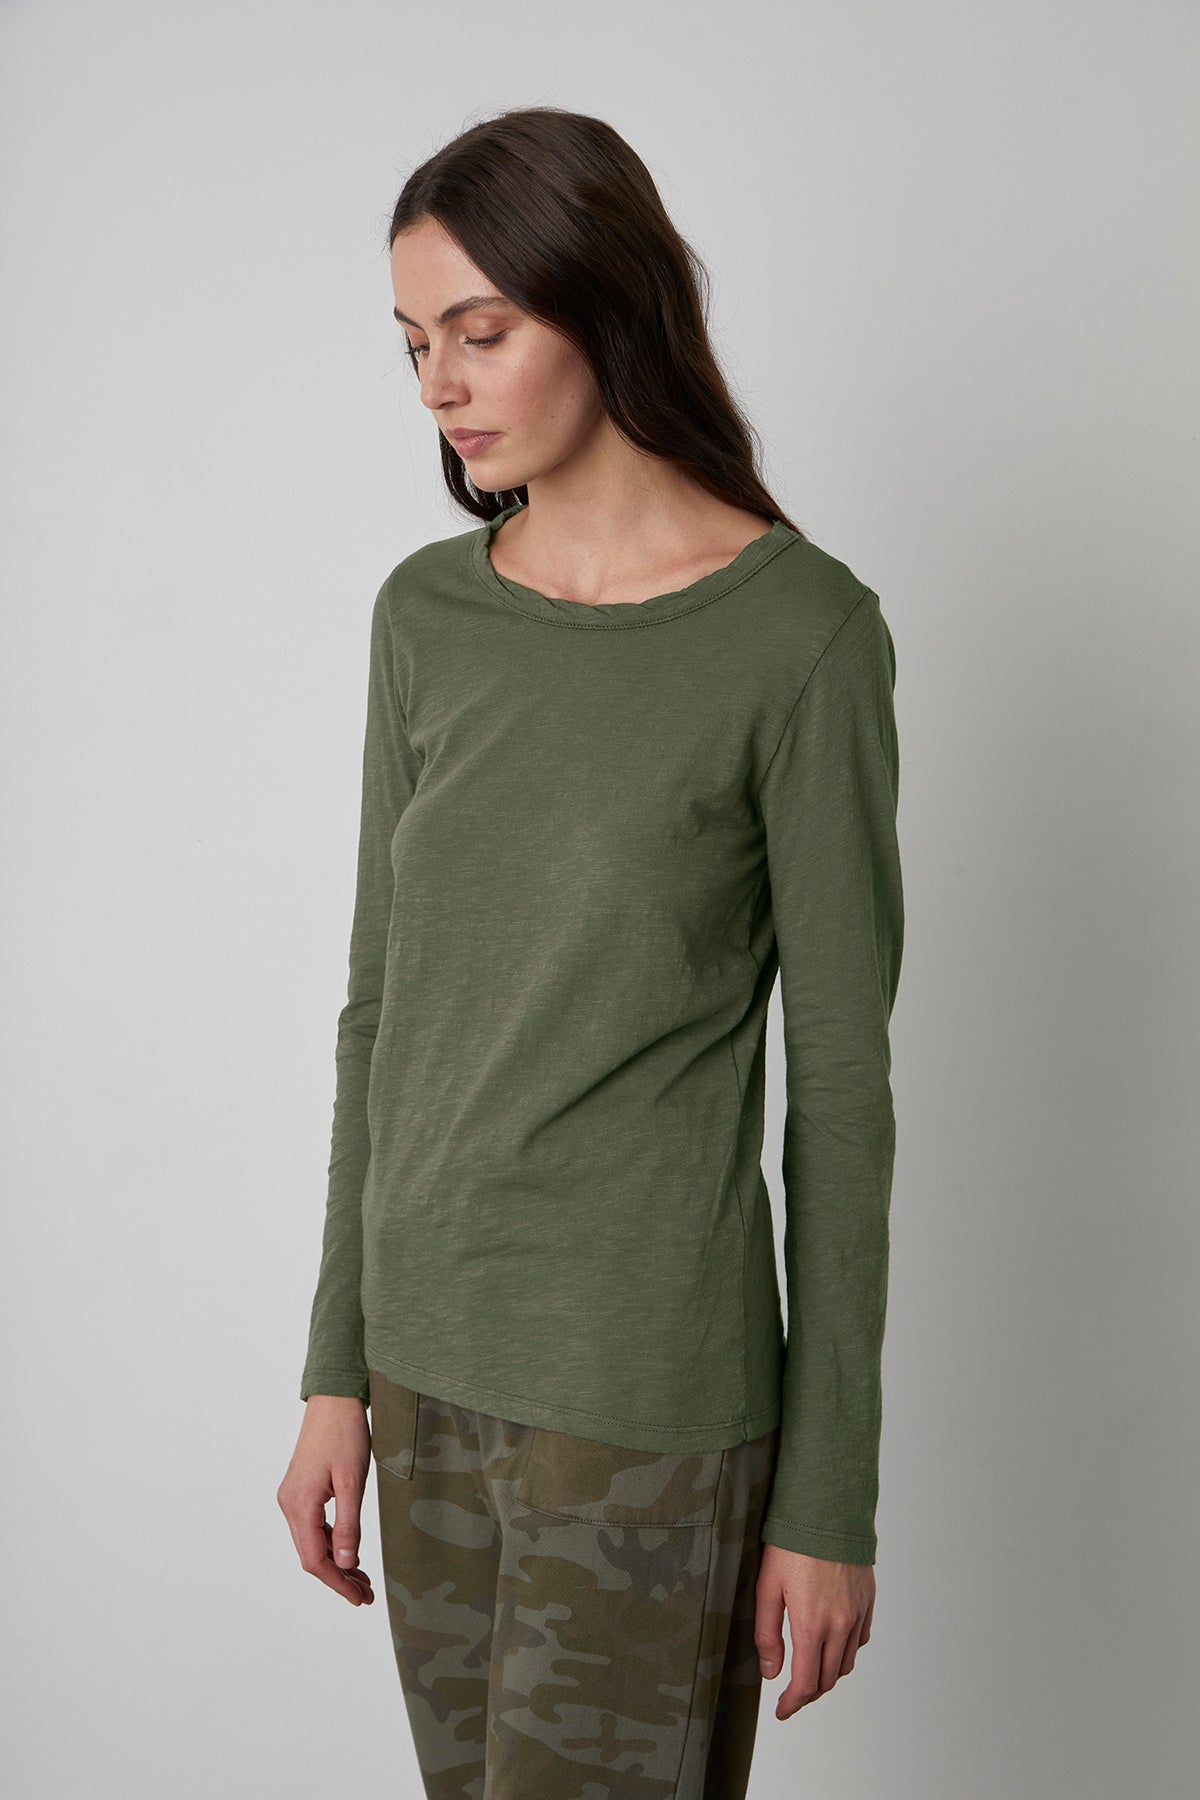   Lizzie Tee Olive with Skye Sweatpant Nettle Front & Side 2 